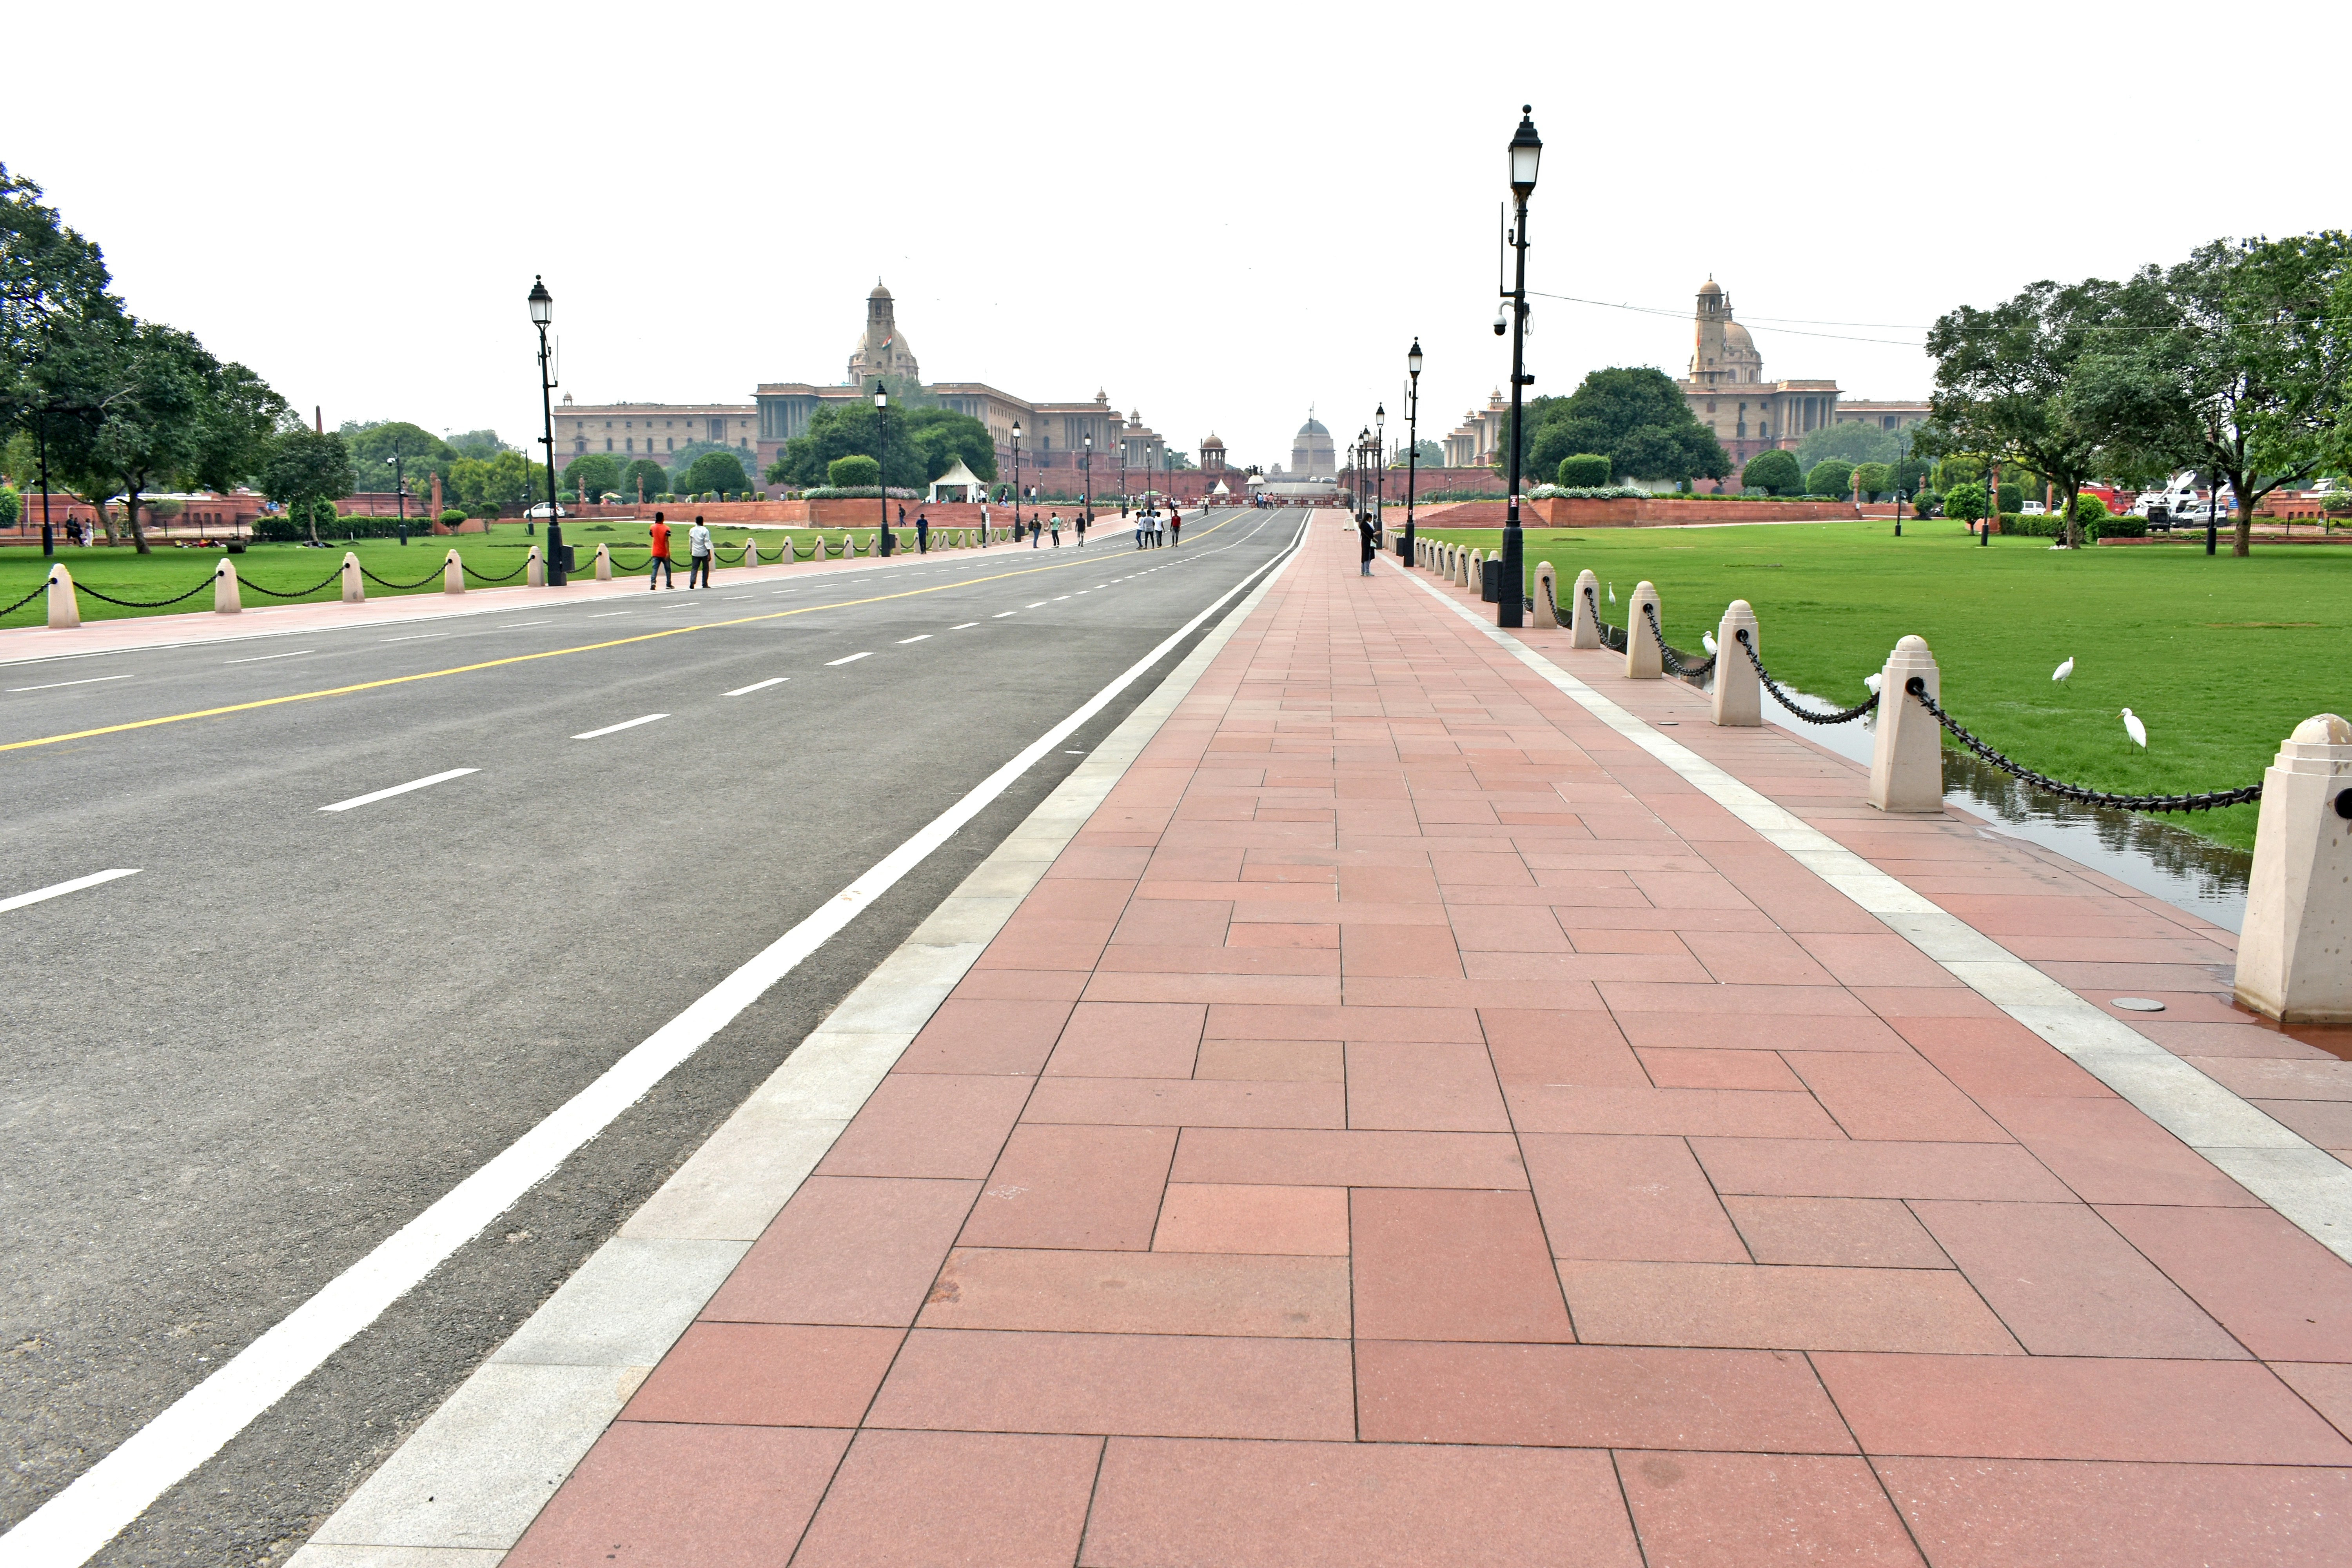 The ceremonial axis - Kartavya Path leading up to Rashtrapati Bhavan, the residence of the President of India flanked on either sides by North and South Blocks, New Delhi, India [Photo: September 2022]